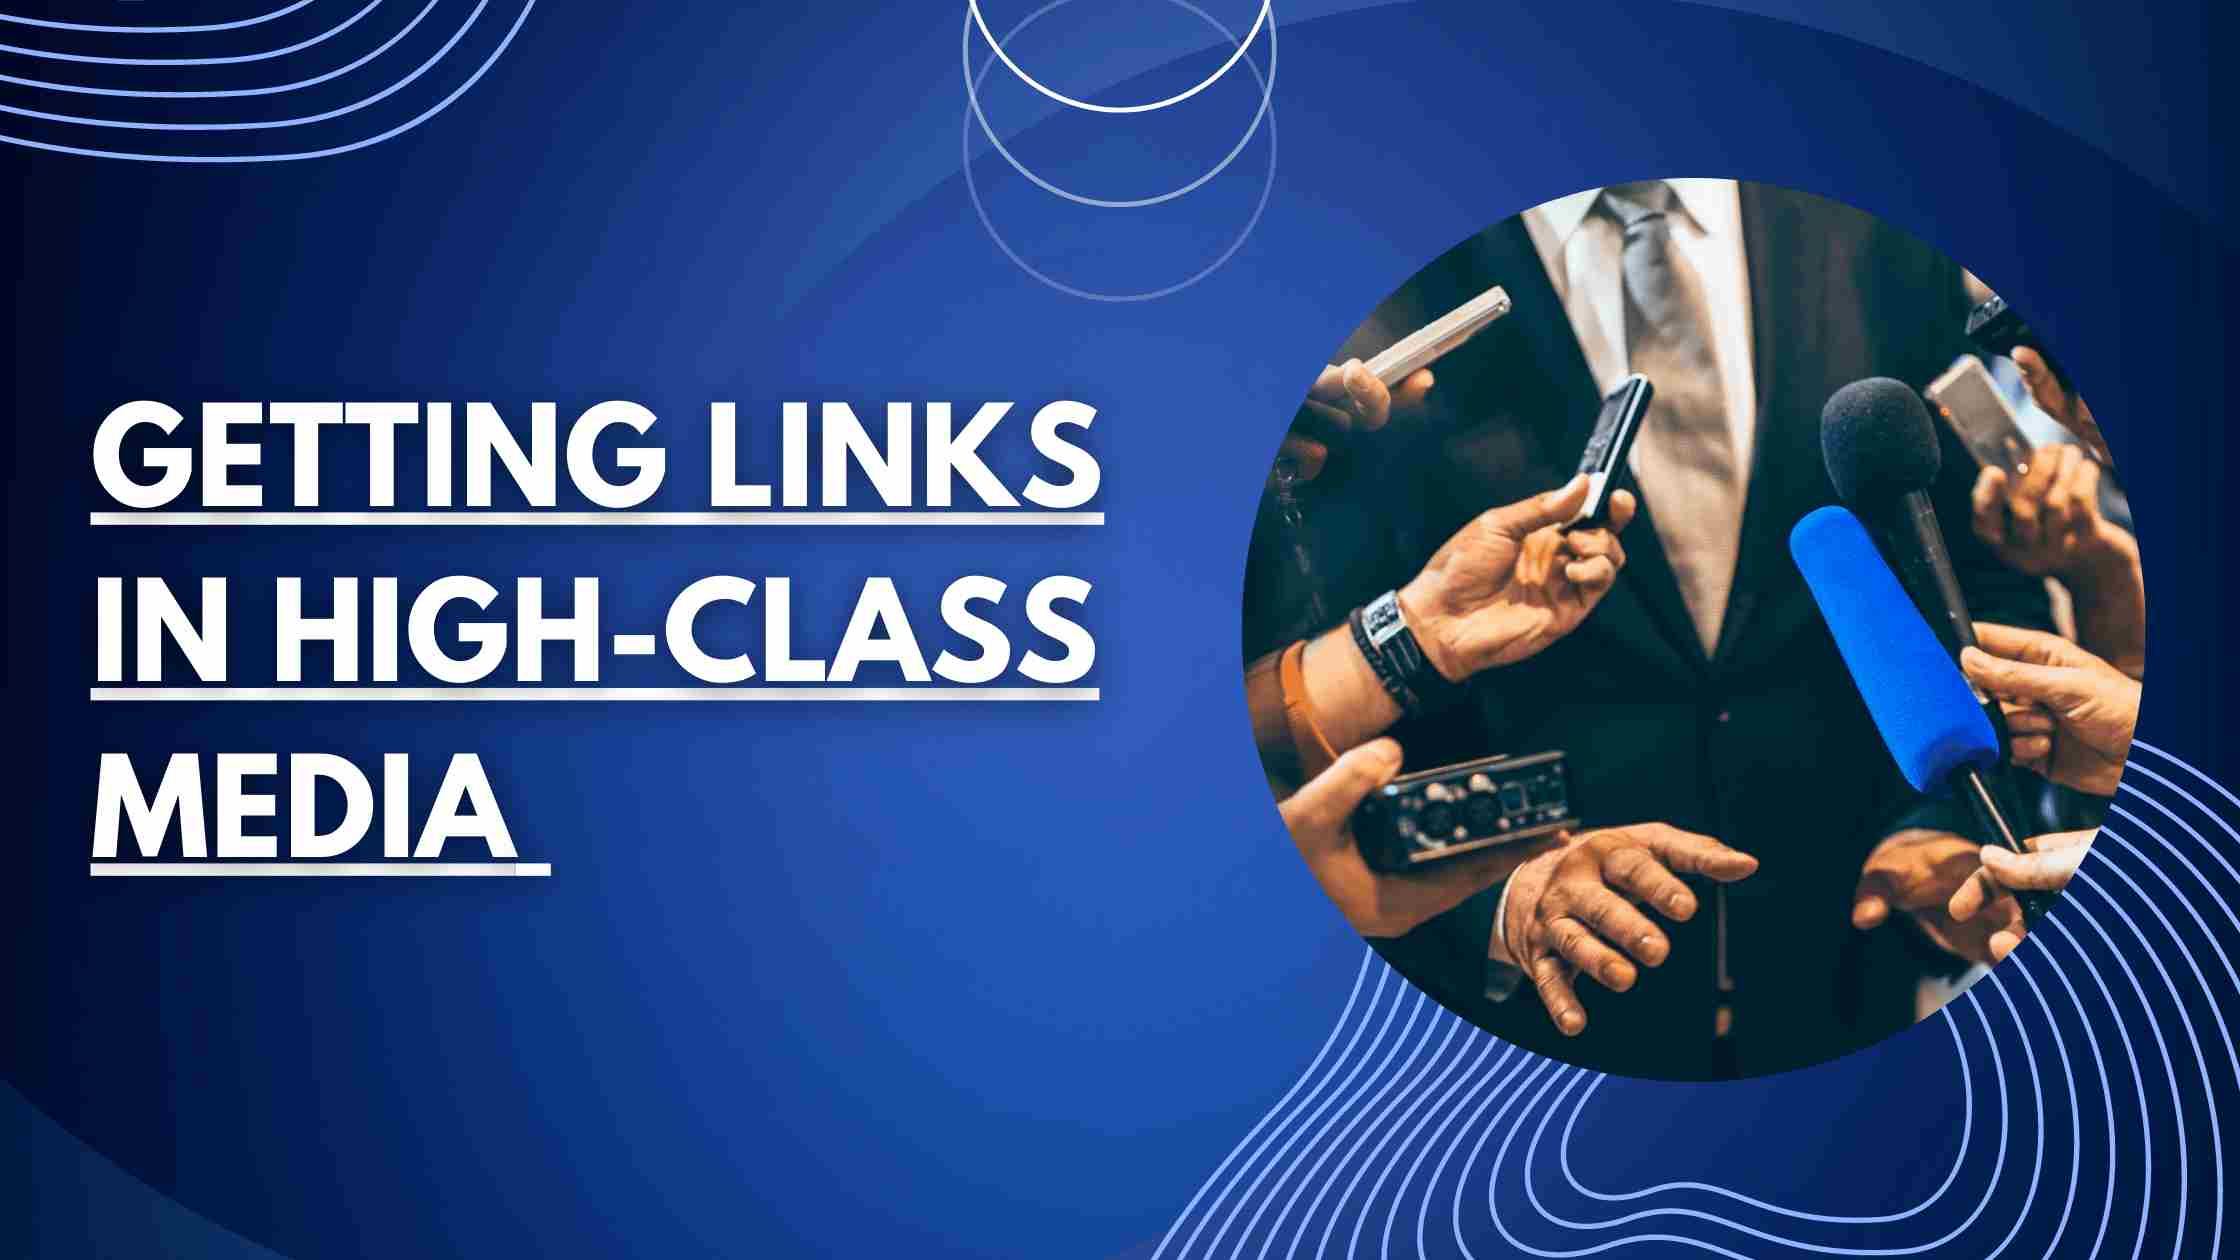 Getting Links in High-Class Media